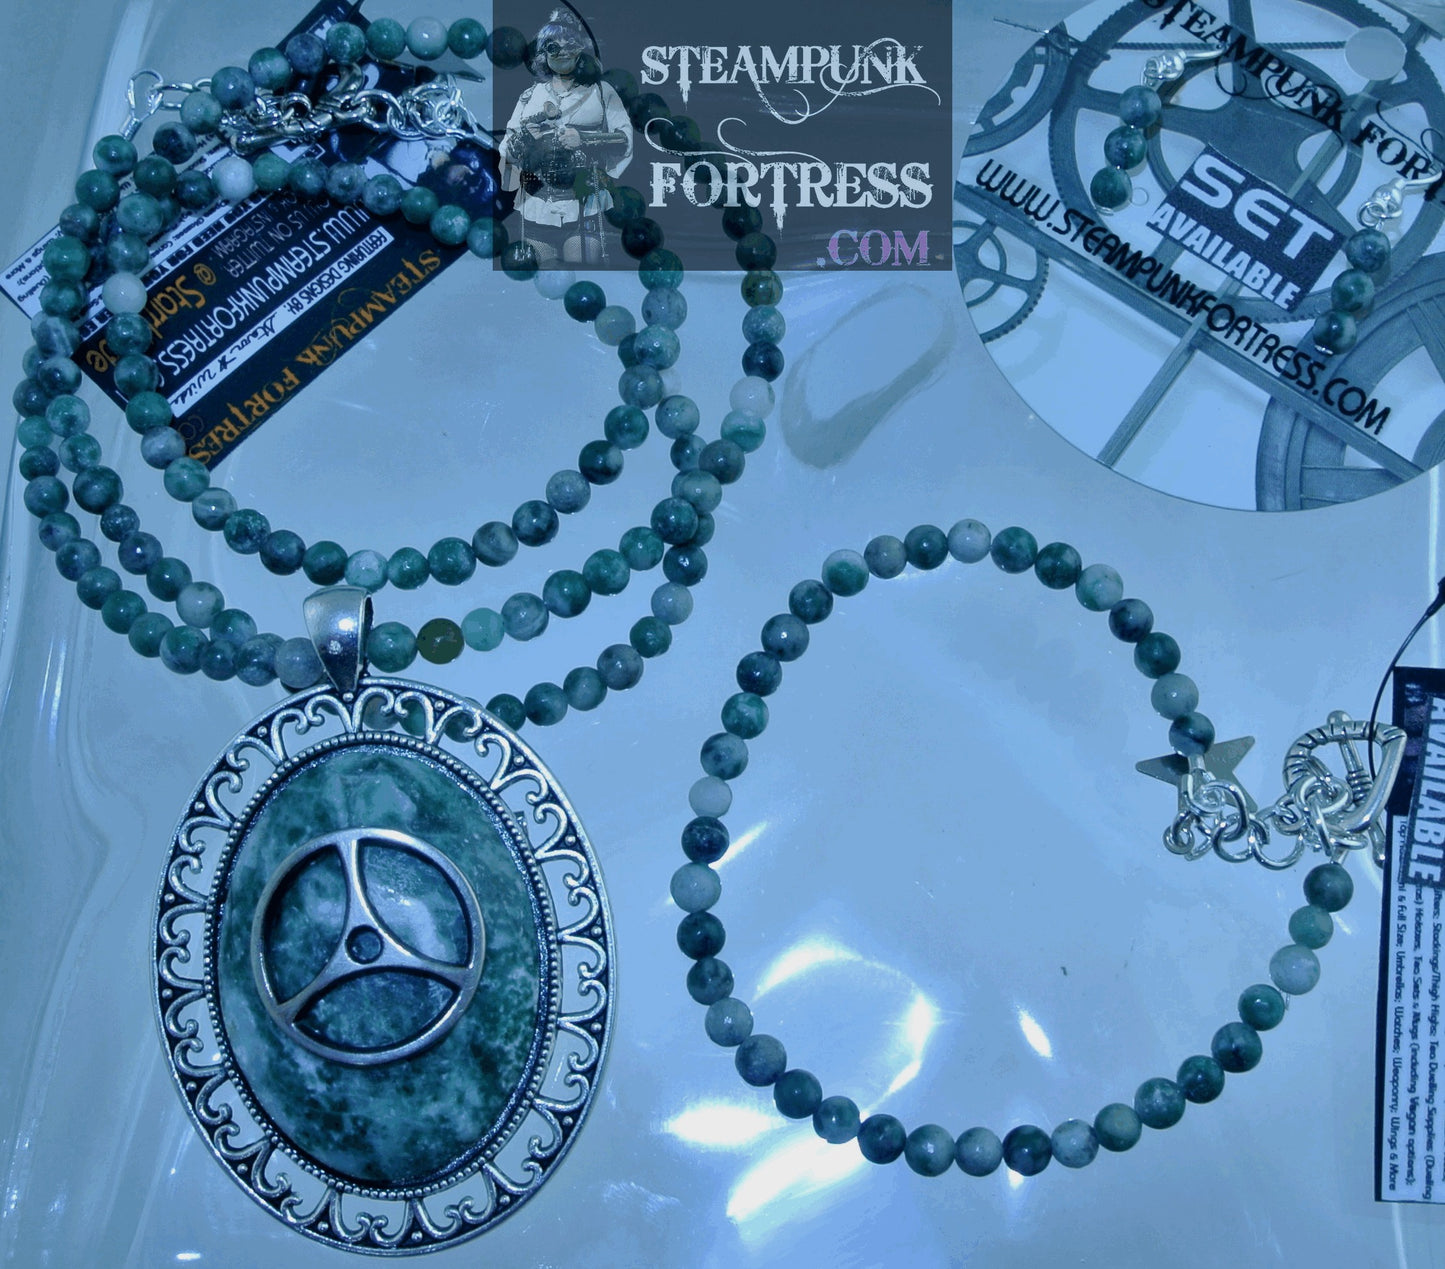 SILVER TREE AGATE ROUNDS GEMSTONES STONES BRACELET SET AVAILABLE STARR WILDE STEAMPUNK FORTRESS